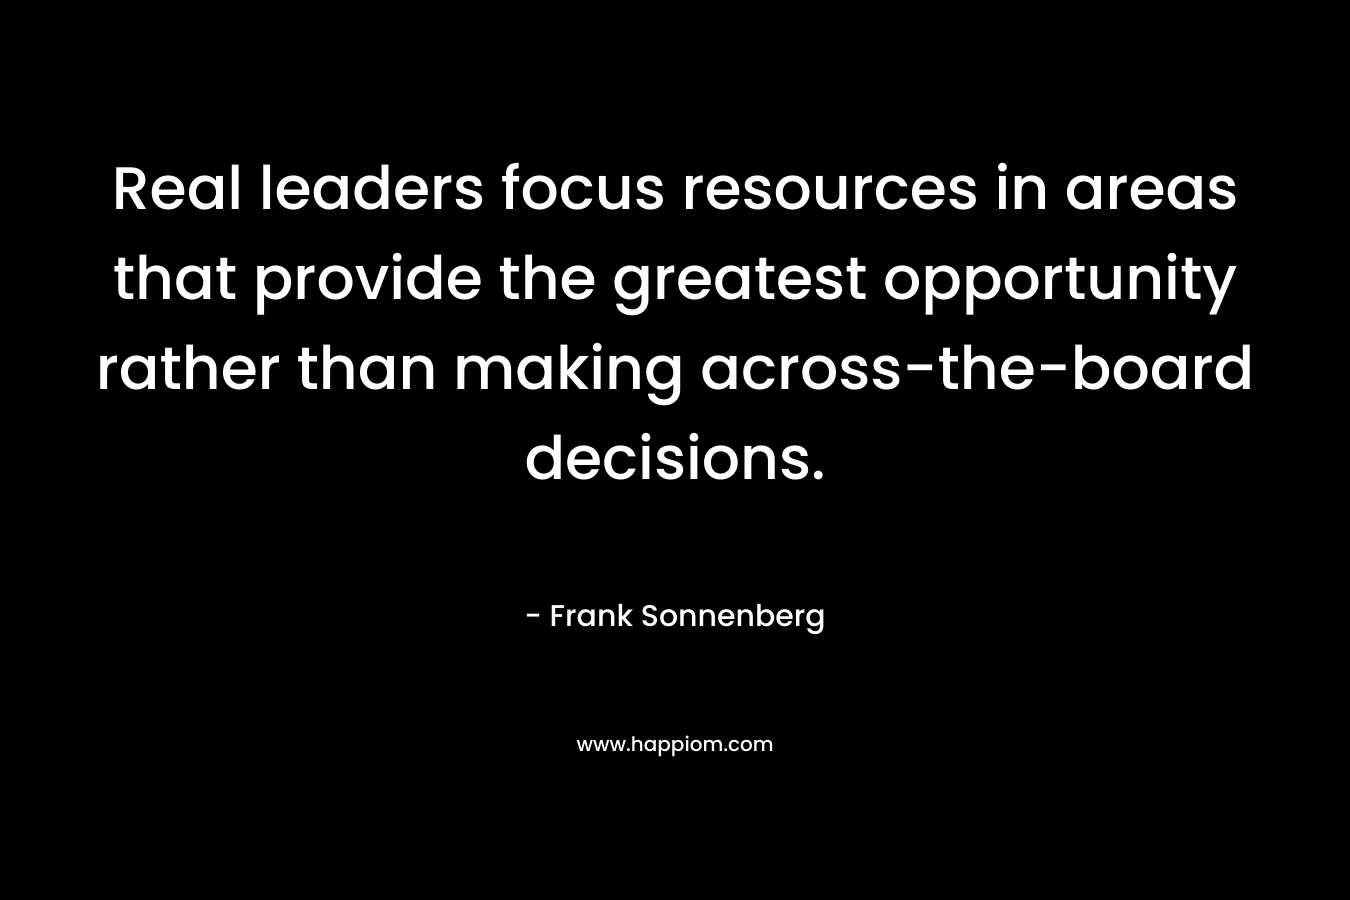 Real leaders focus resources in areas that provide the greatest opportunity rather than making across-the-board decisions.